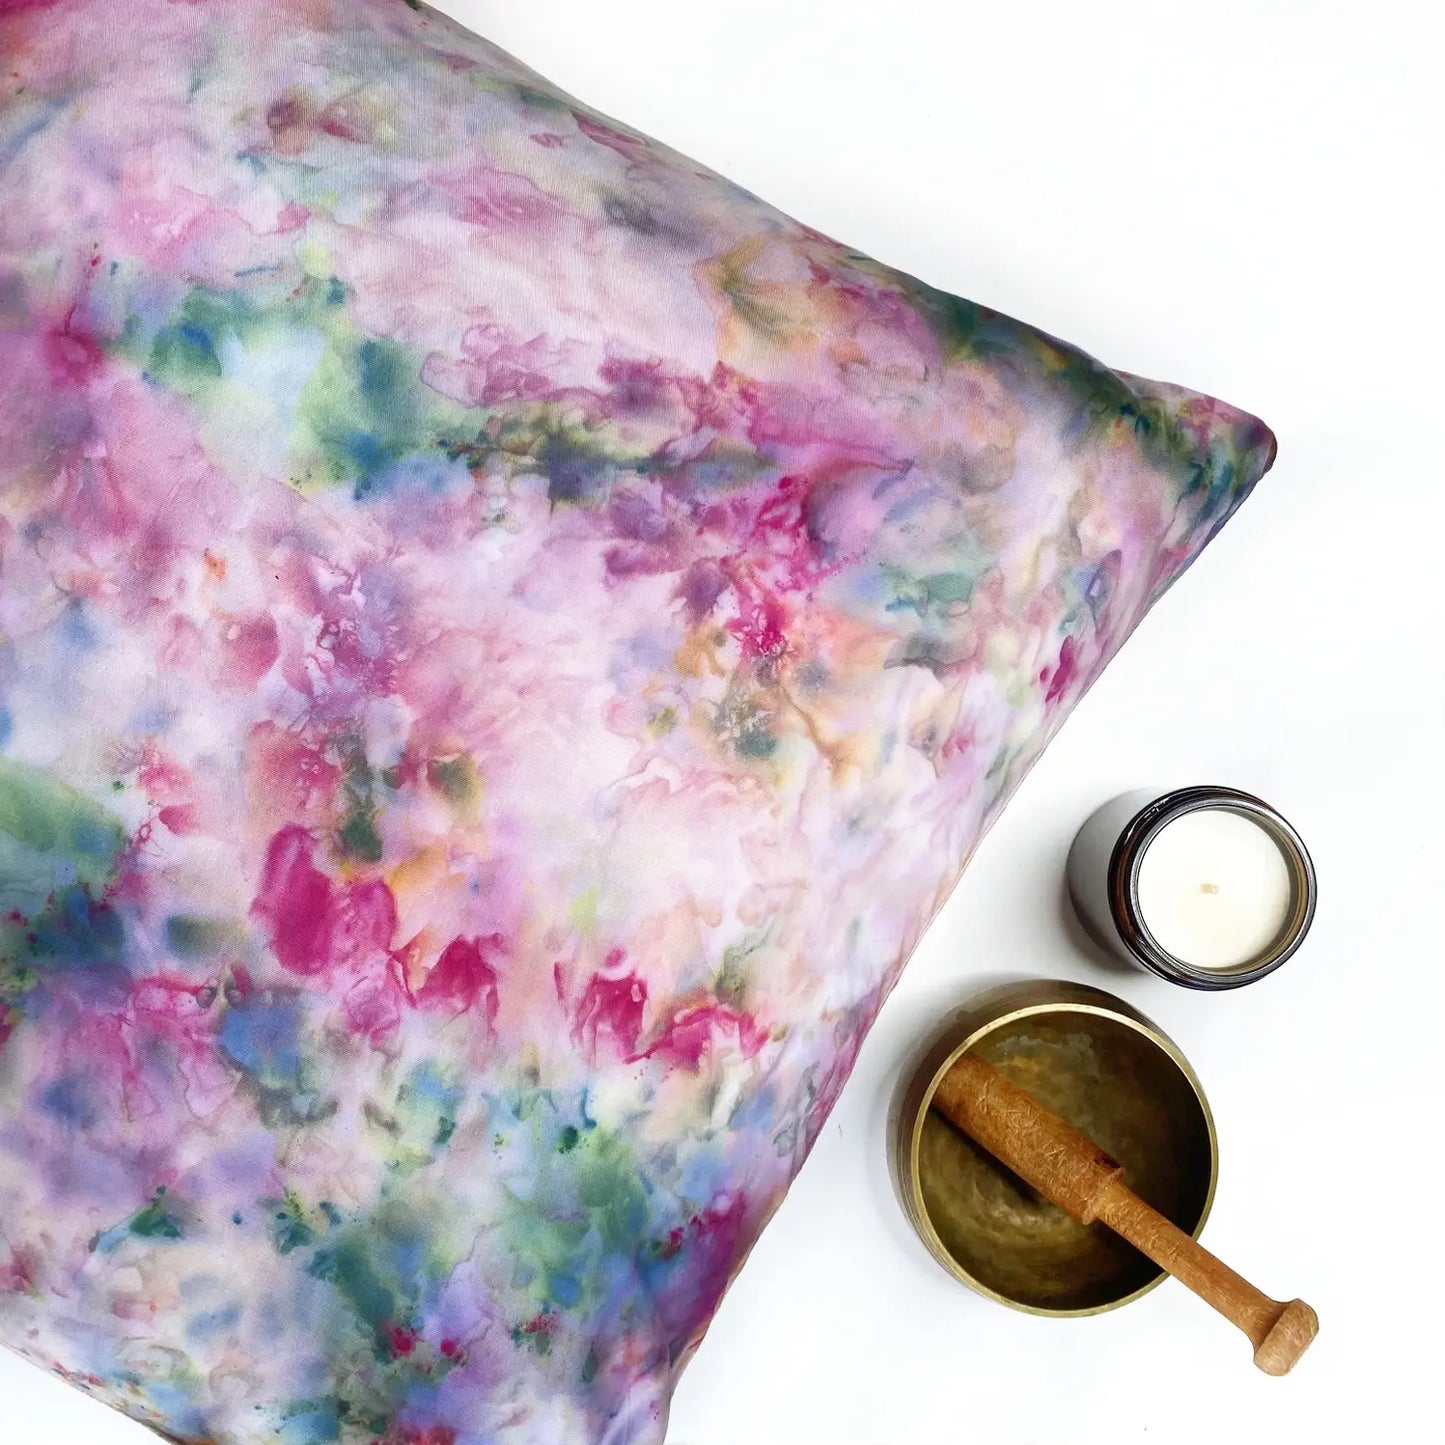 Ice Dyeing Workshop - August 17th 5:30-7:00pm